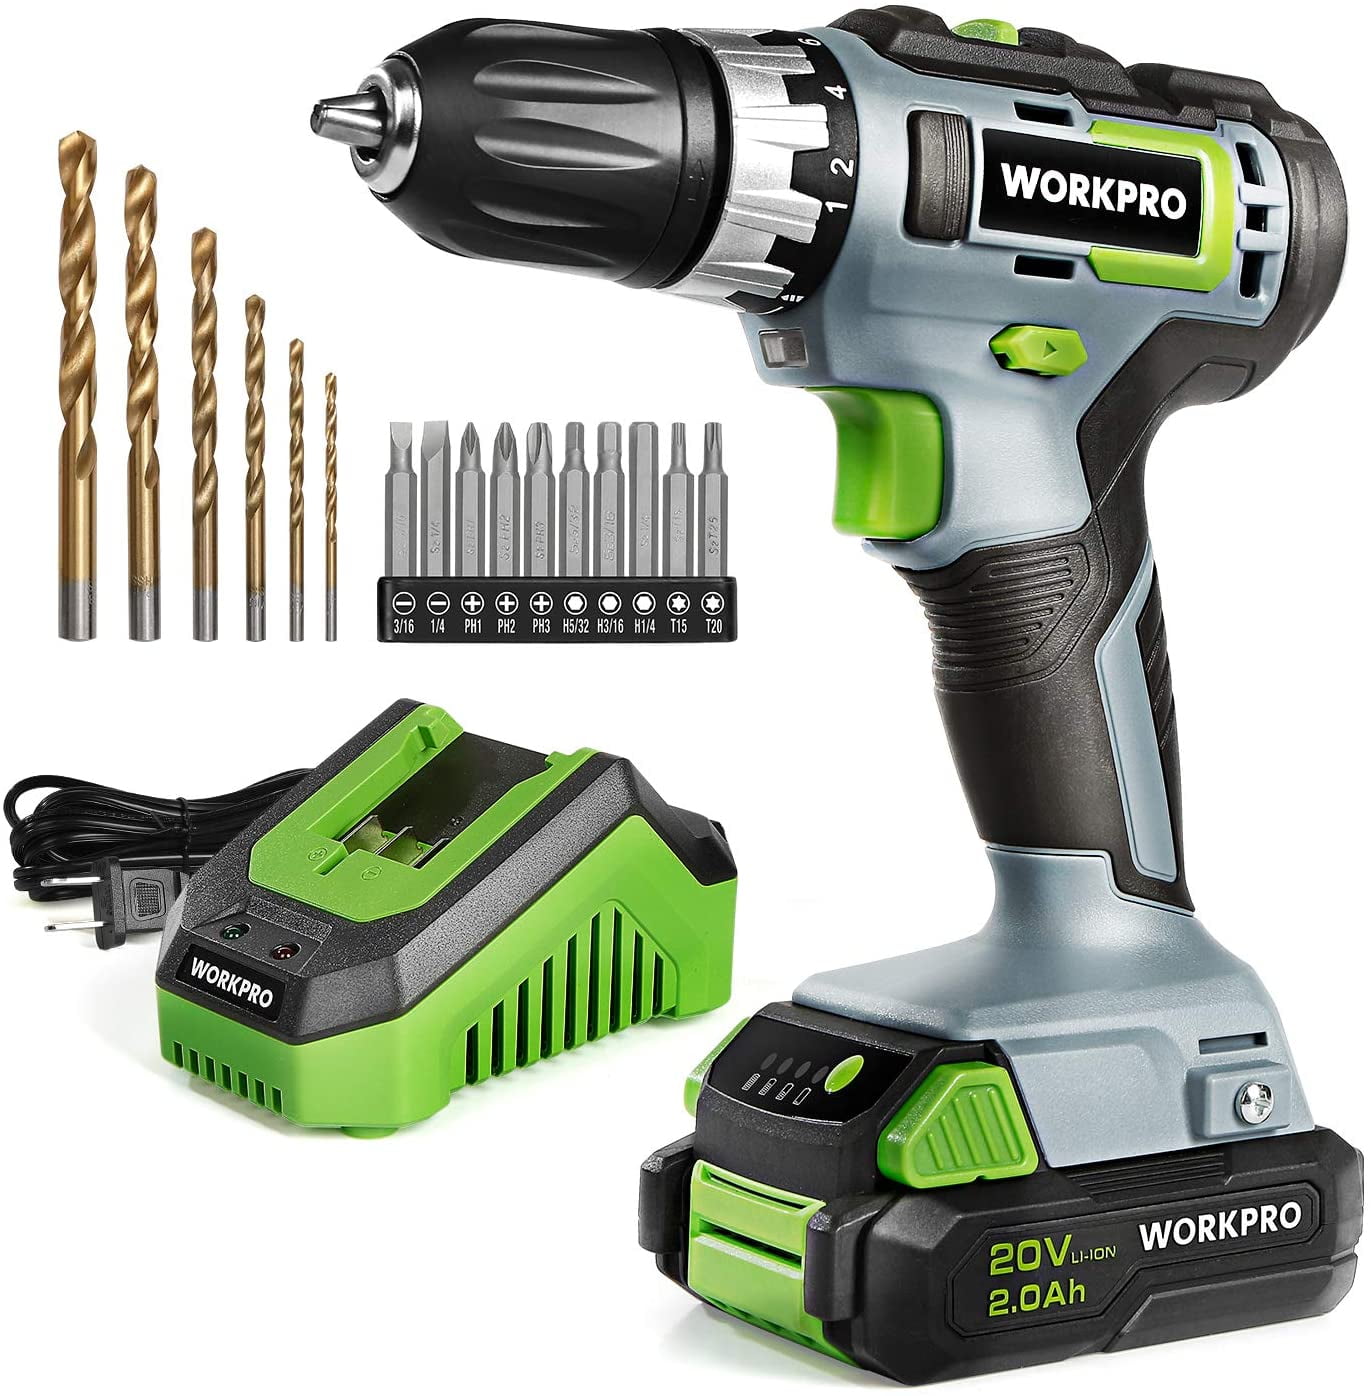  FASTPRO 20V Max Cordless Drill set, 3/8 in. Power Drill Driver  kit with One 1.5 Ah Lithium-ion Batteries, Charger and Tool Bag, Green :  Tools & Home Improvement